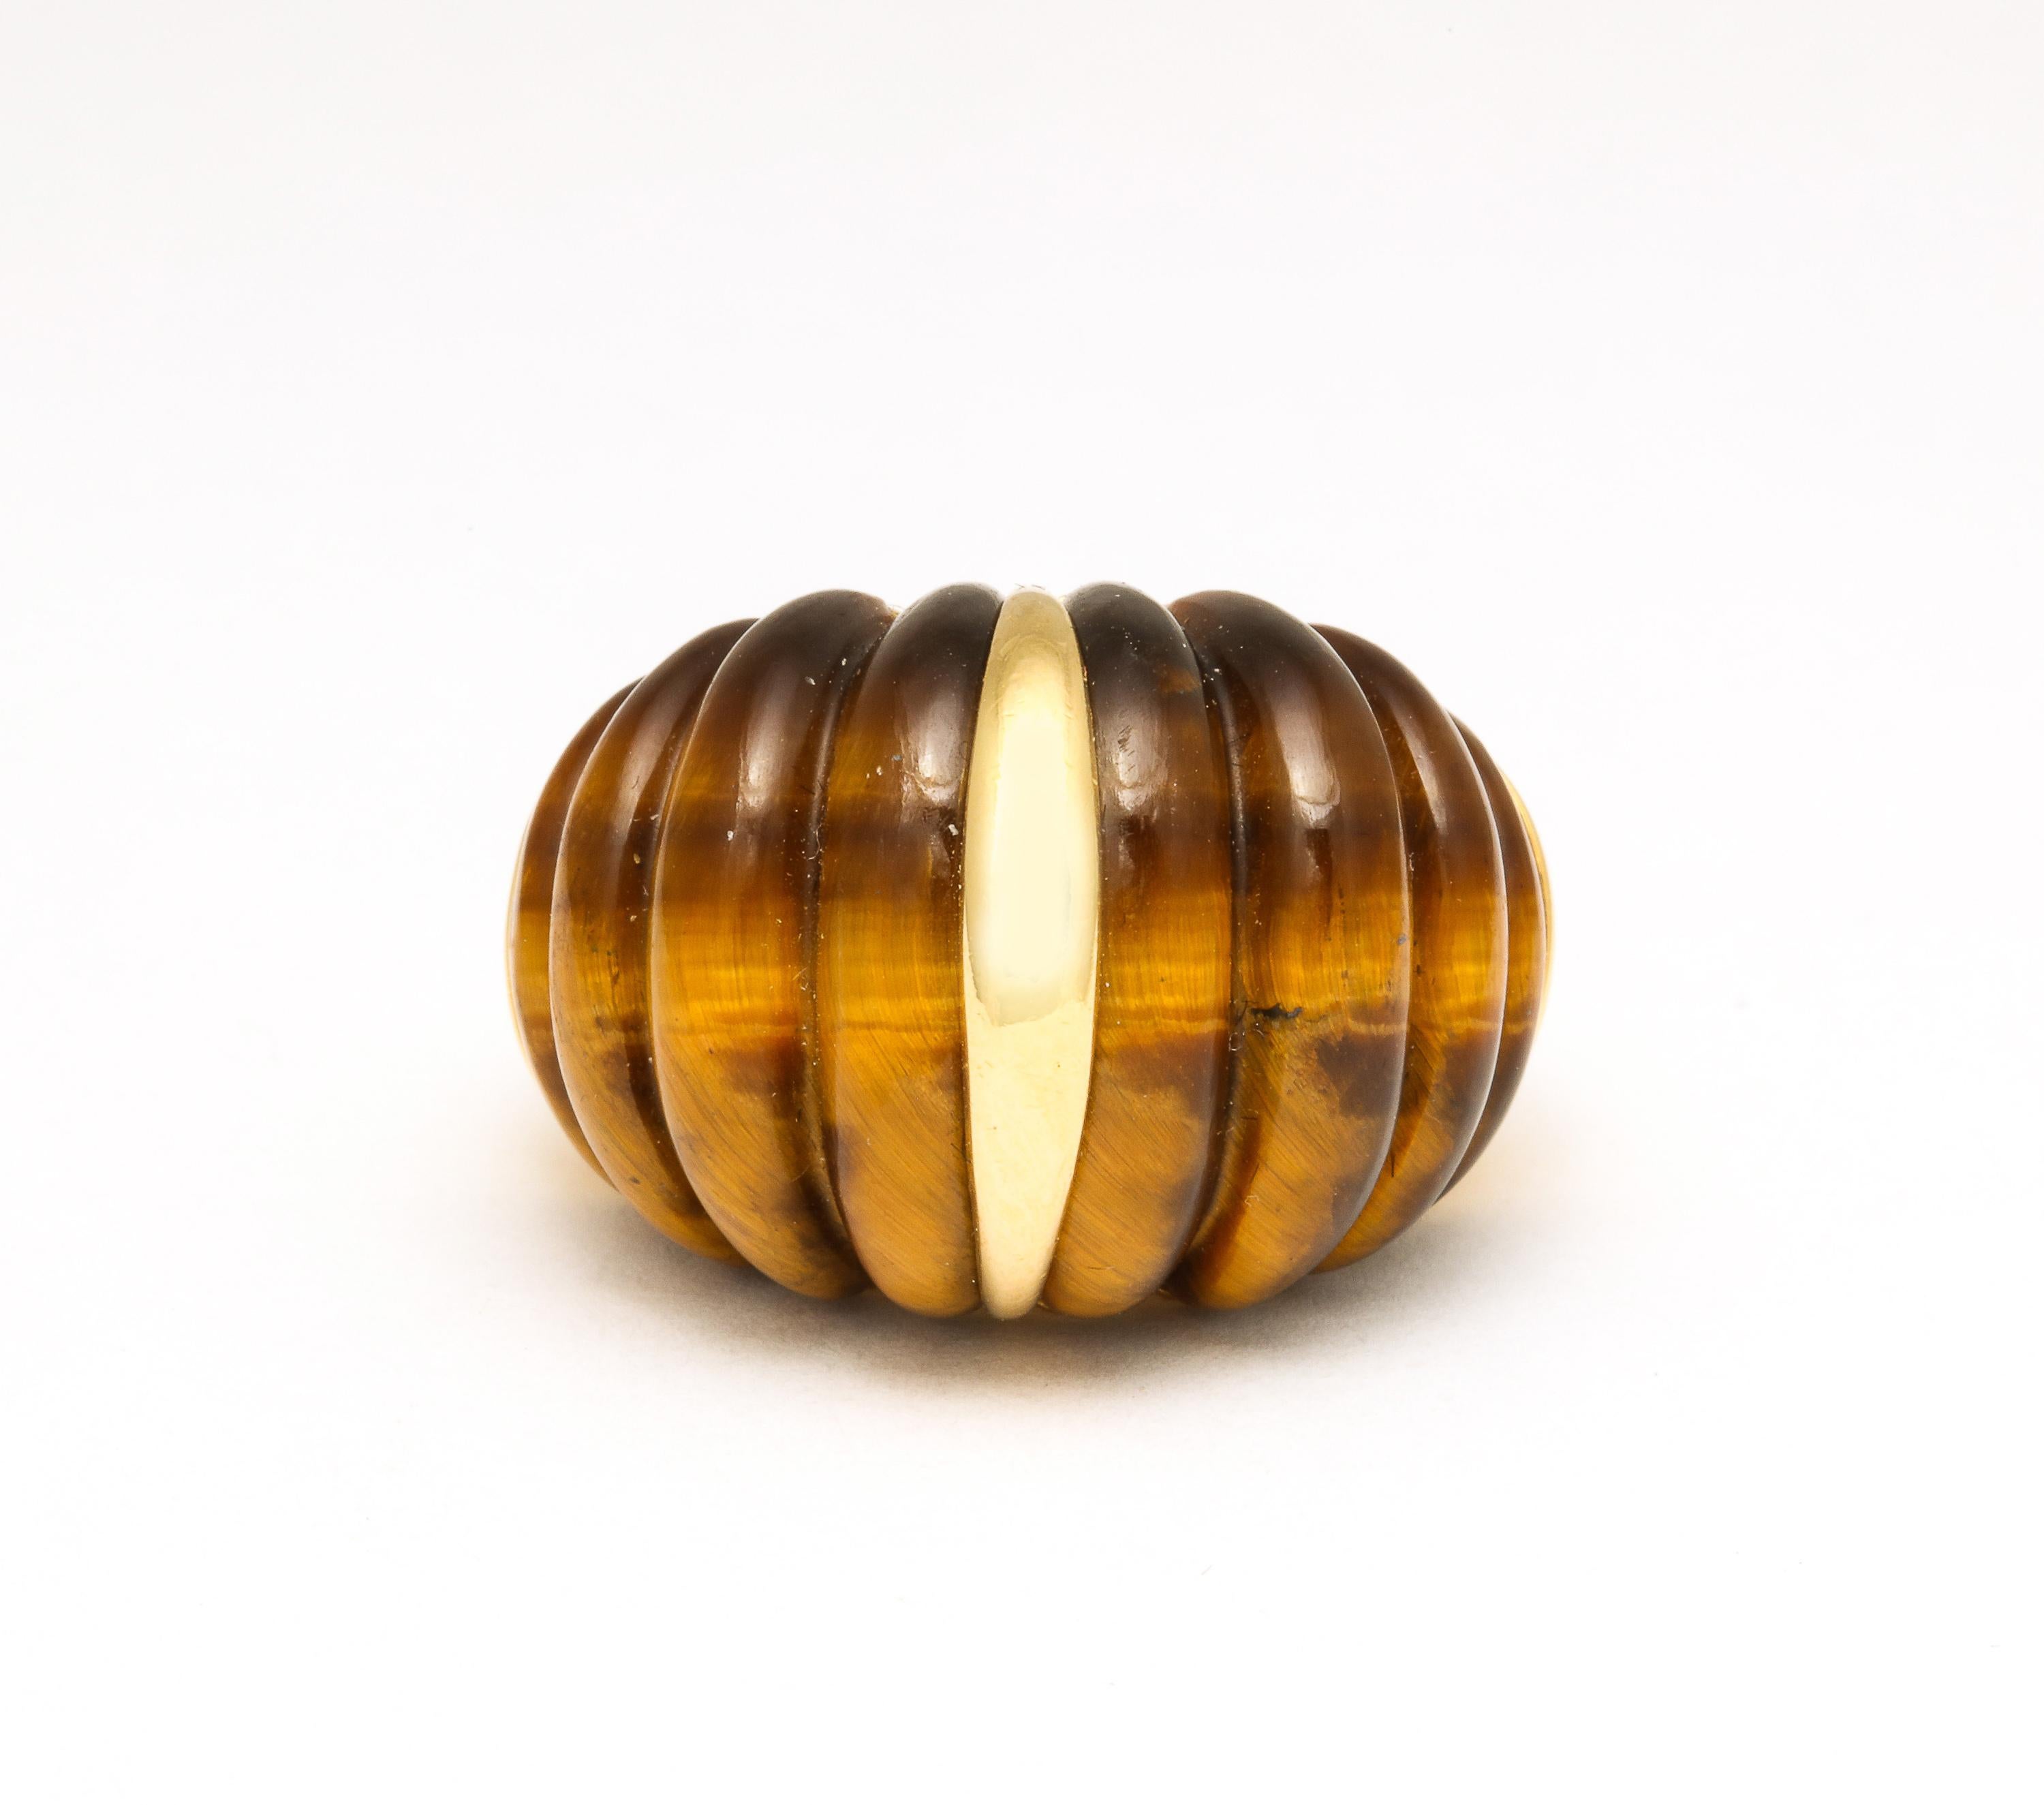 18kt  Yellow Gold and Melon Shaped Tiger's Eye Ring .  Very chic. Beautifully banded and ever so elegant and so much of the Period.

